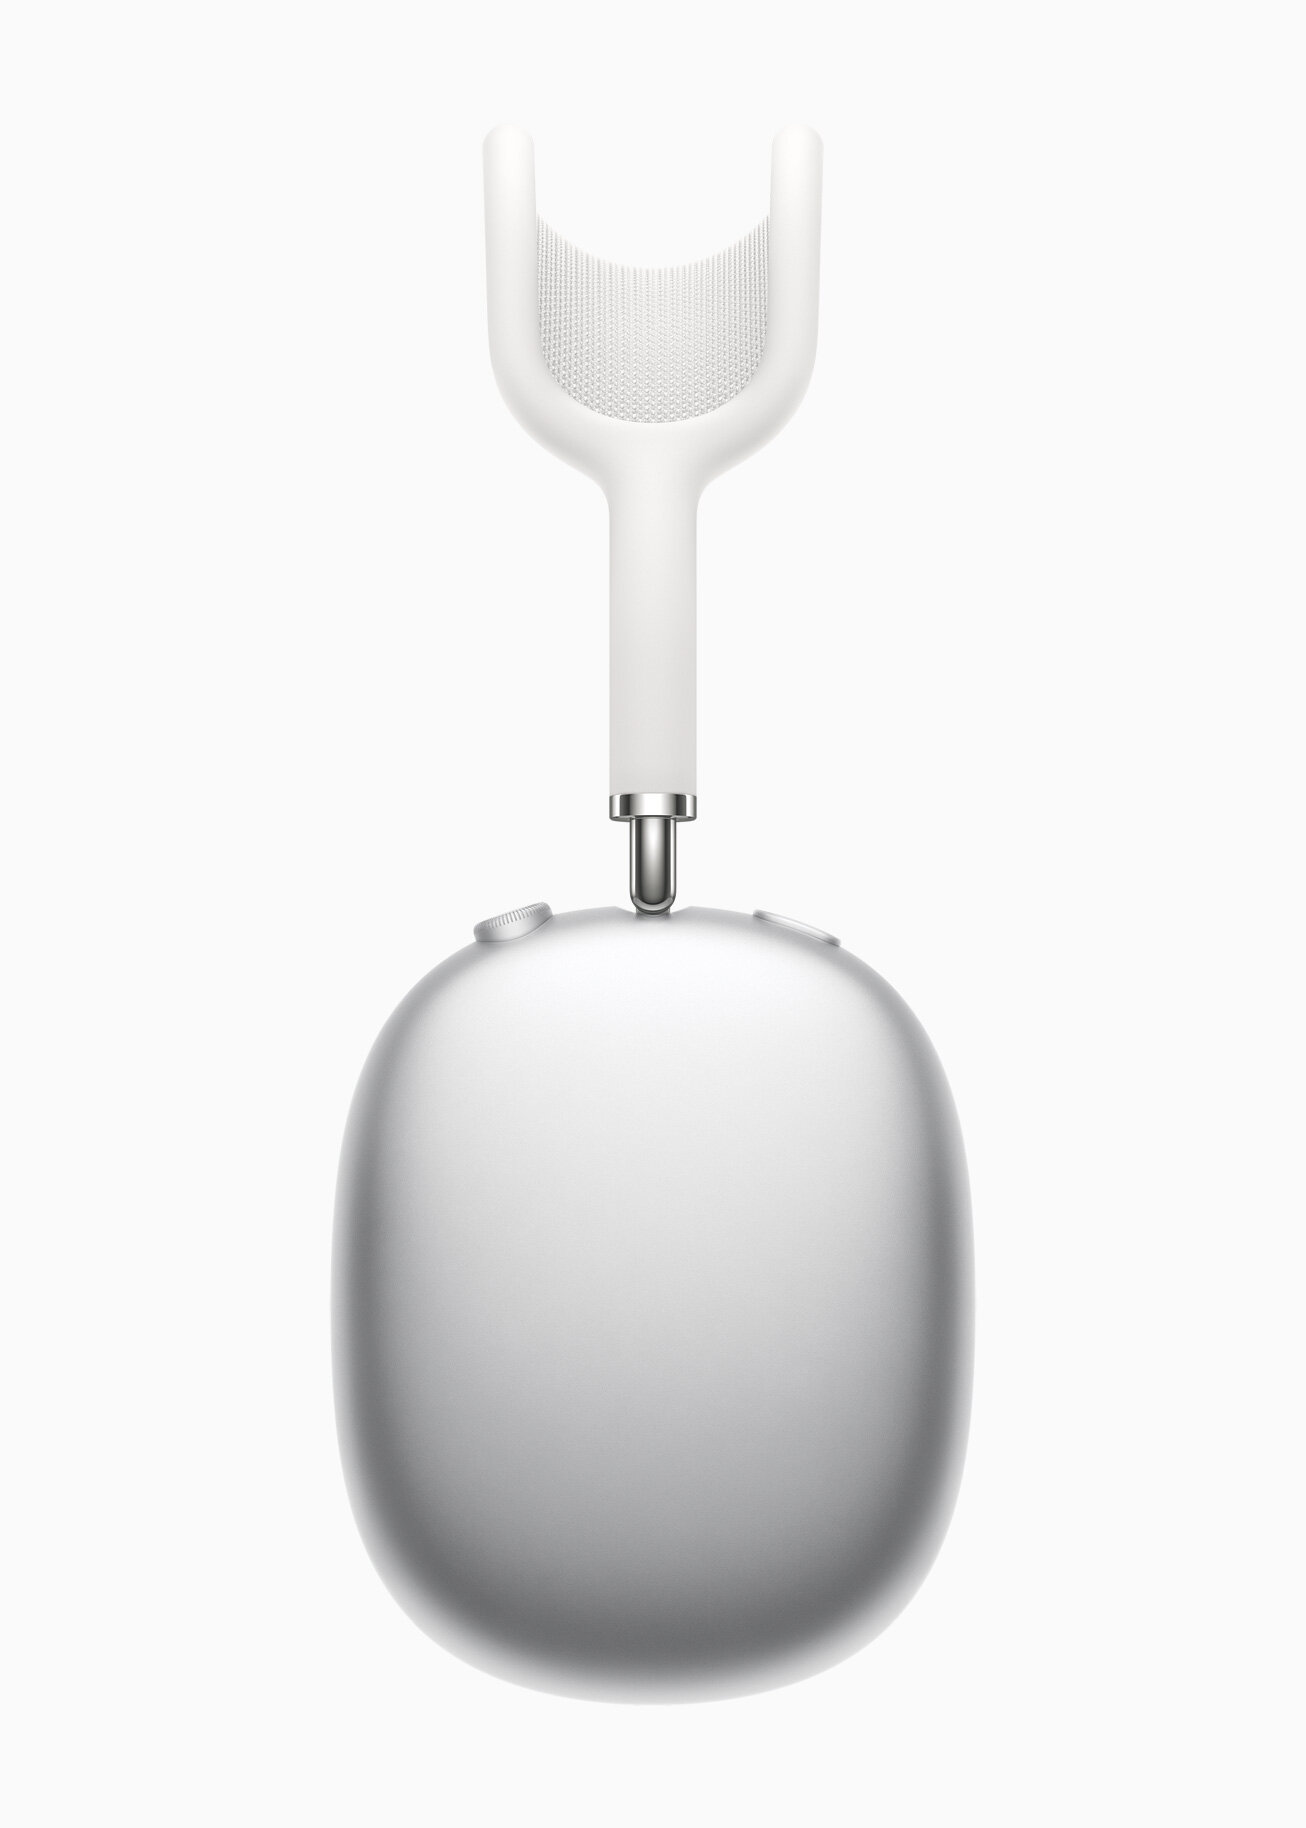 apple_airpods-max_color-white_12082020_carousel.jpg.large_2x.jpg